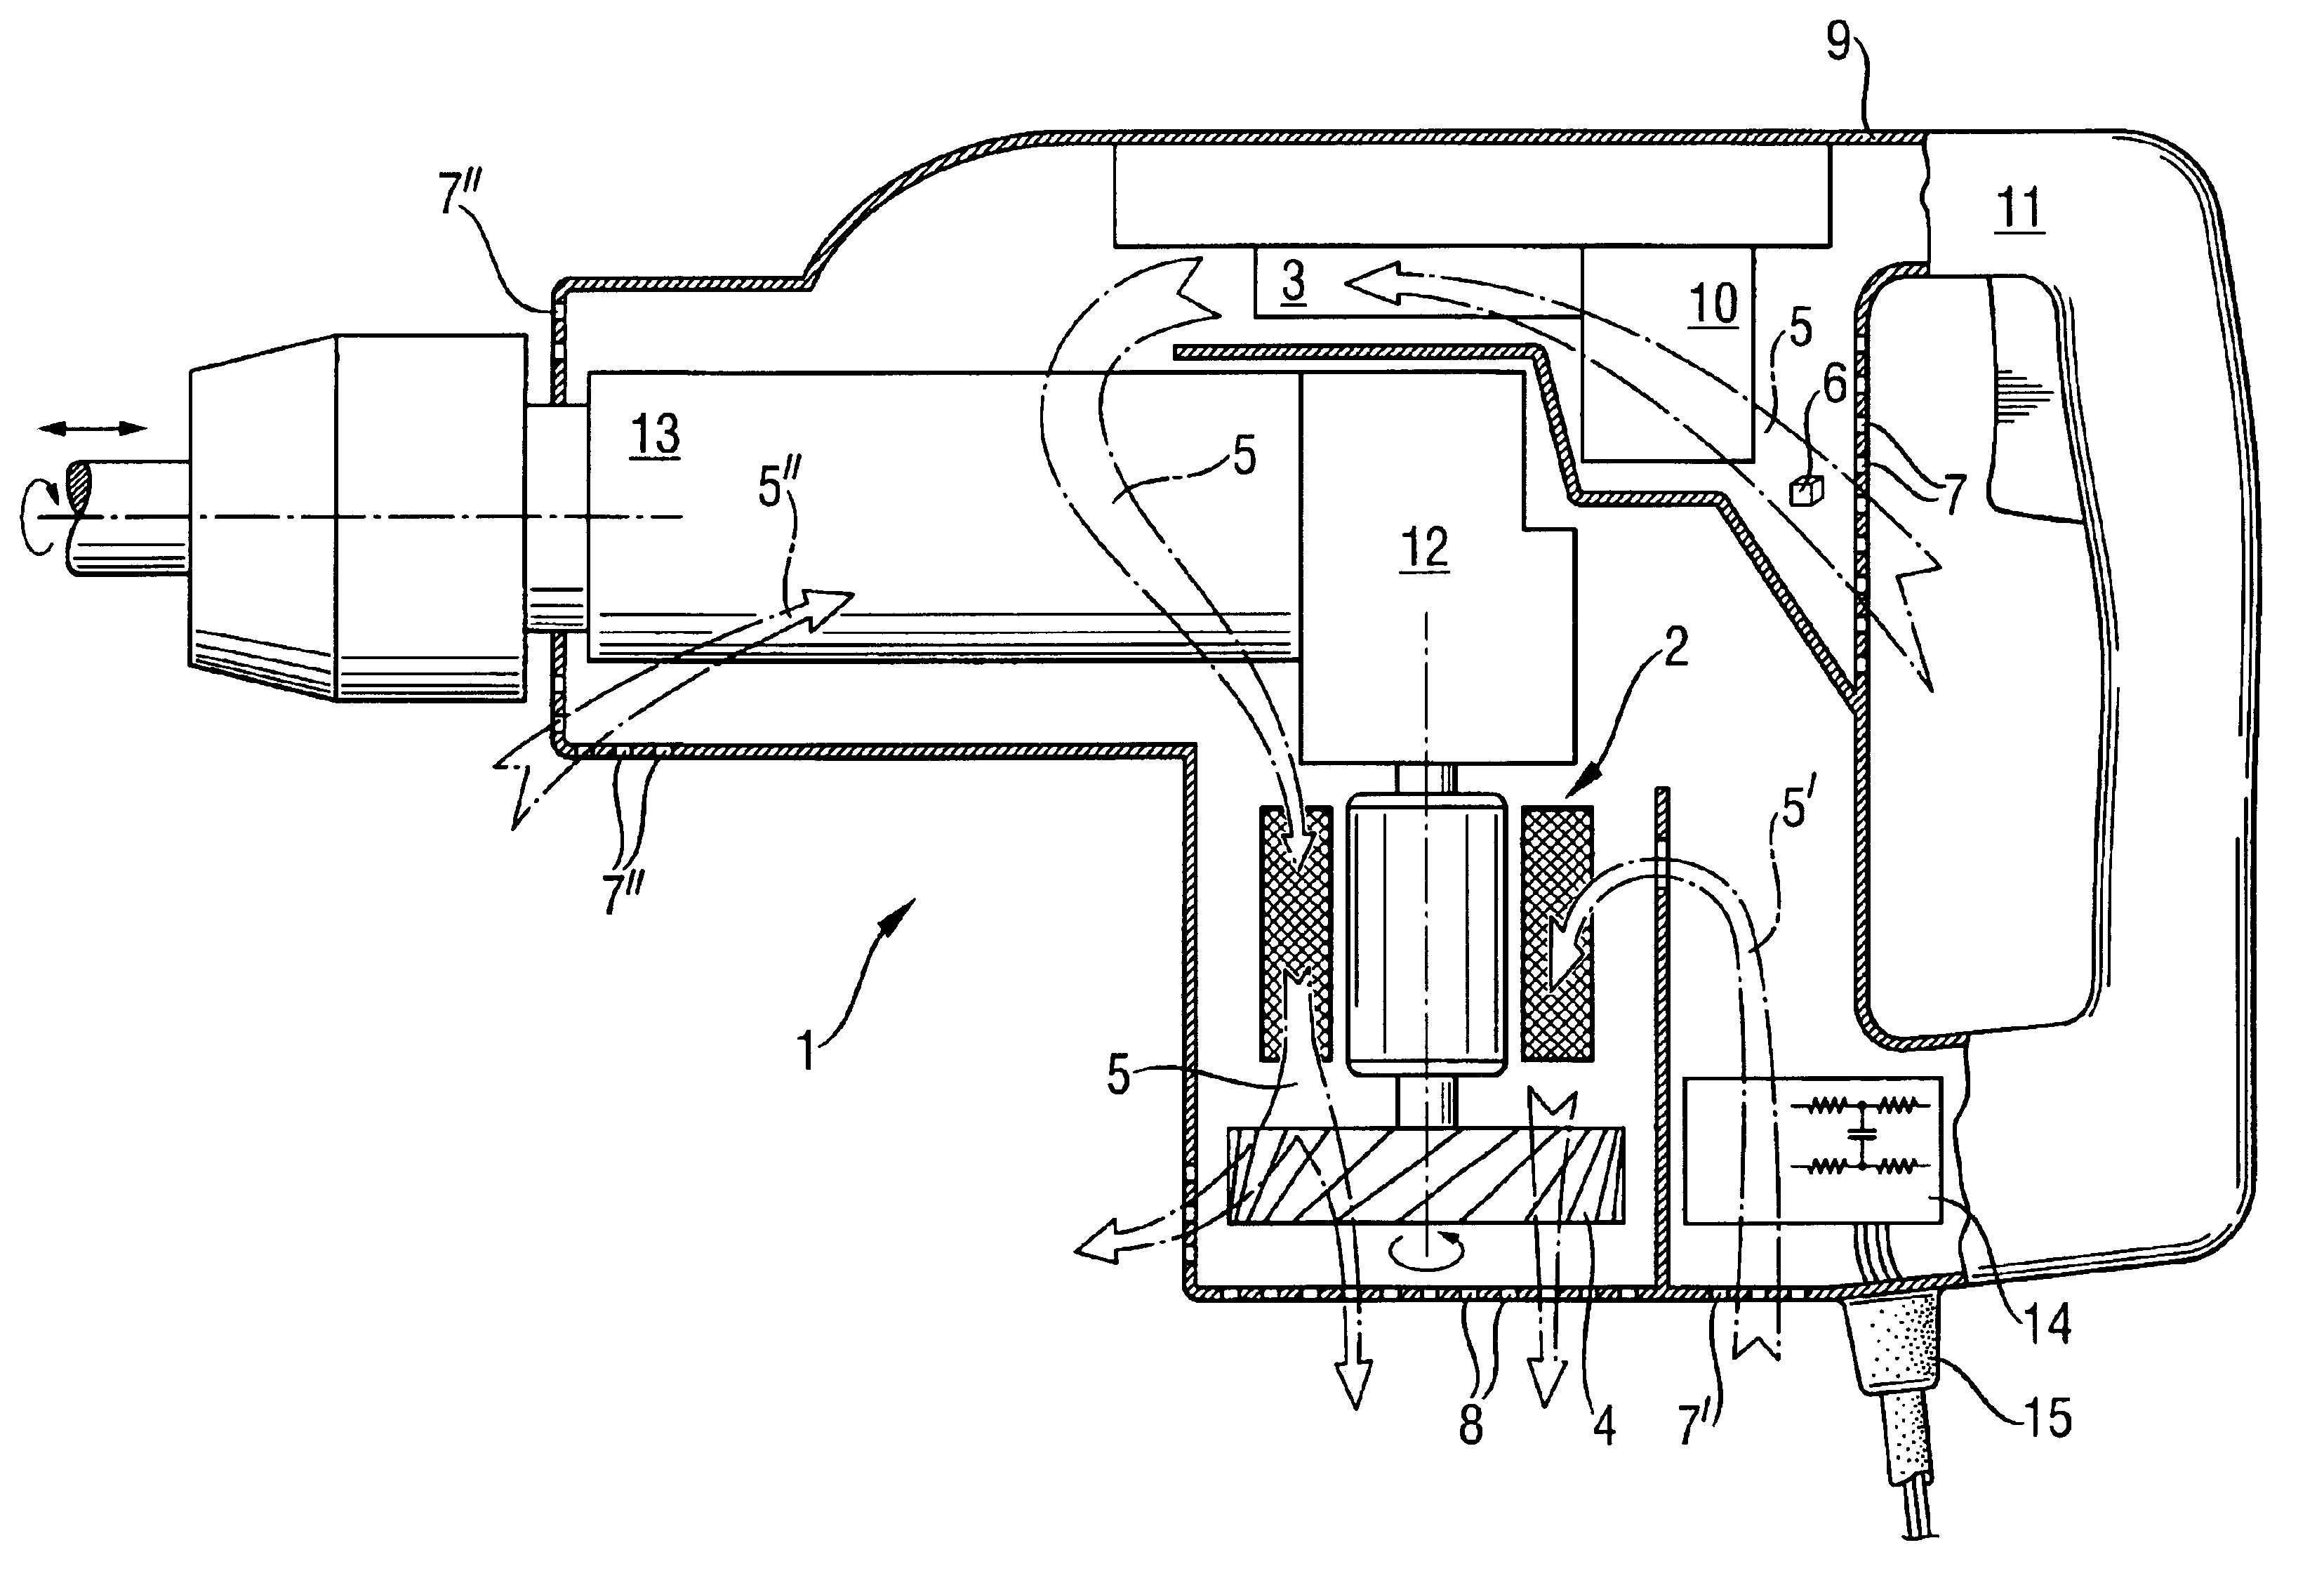 Electrical, fan-cooled tool